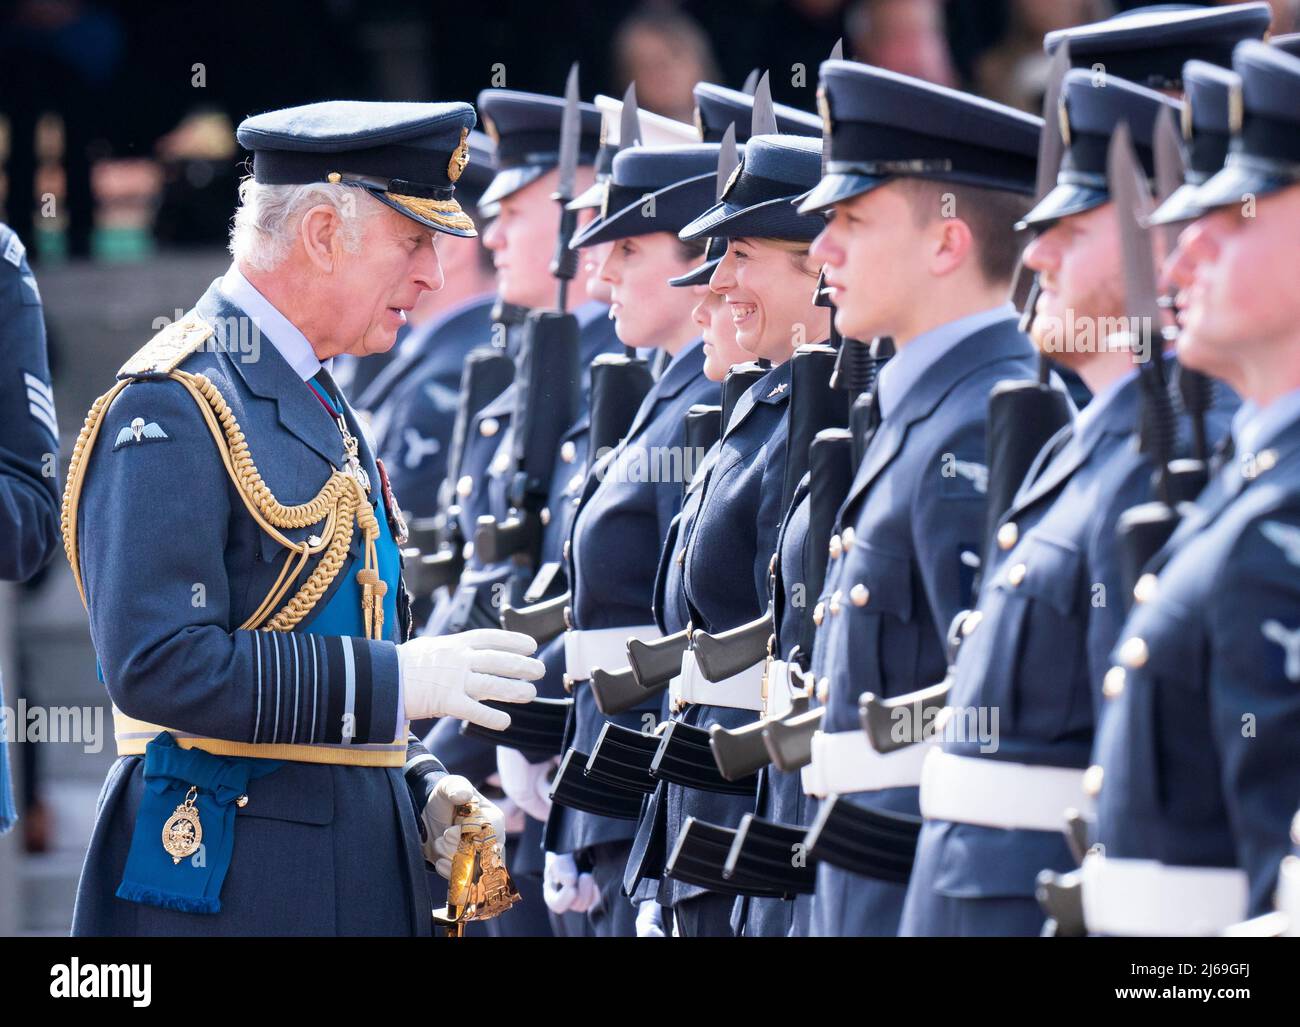 Britain's Prince Charles reacts as he attends a parade held for officers and aviators who graduated from Royal Air Force (RAF) Cranwell and RAF Halton, in Sleaford, Lincolnshire, Britain, April 29, 2022. Danny Lawson/Pool via REUTERS Stock Photo